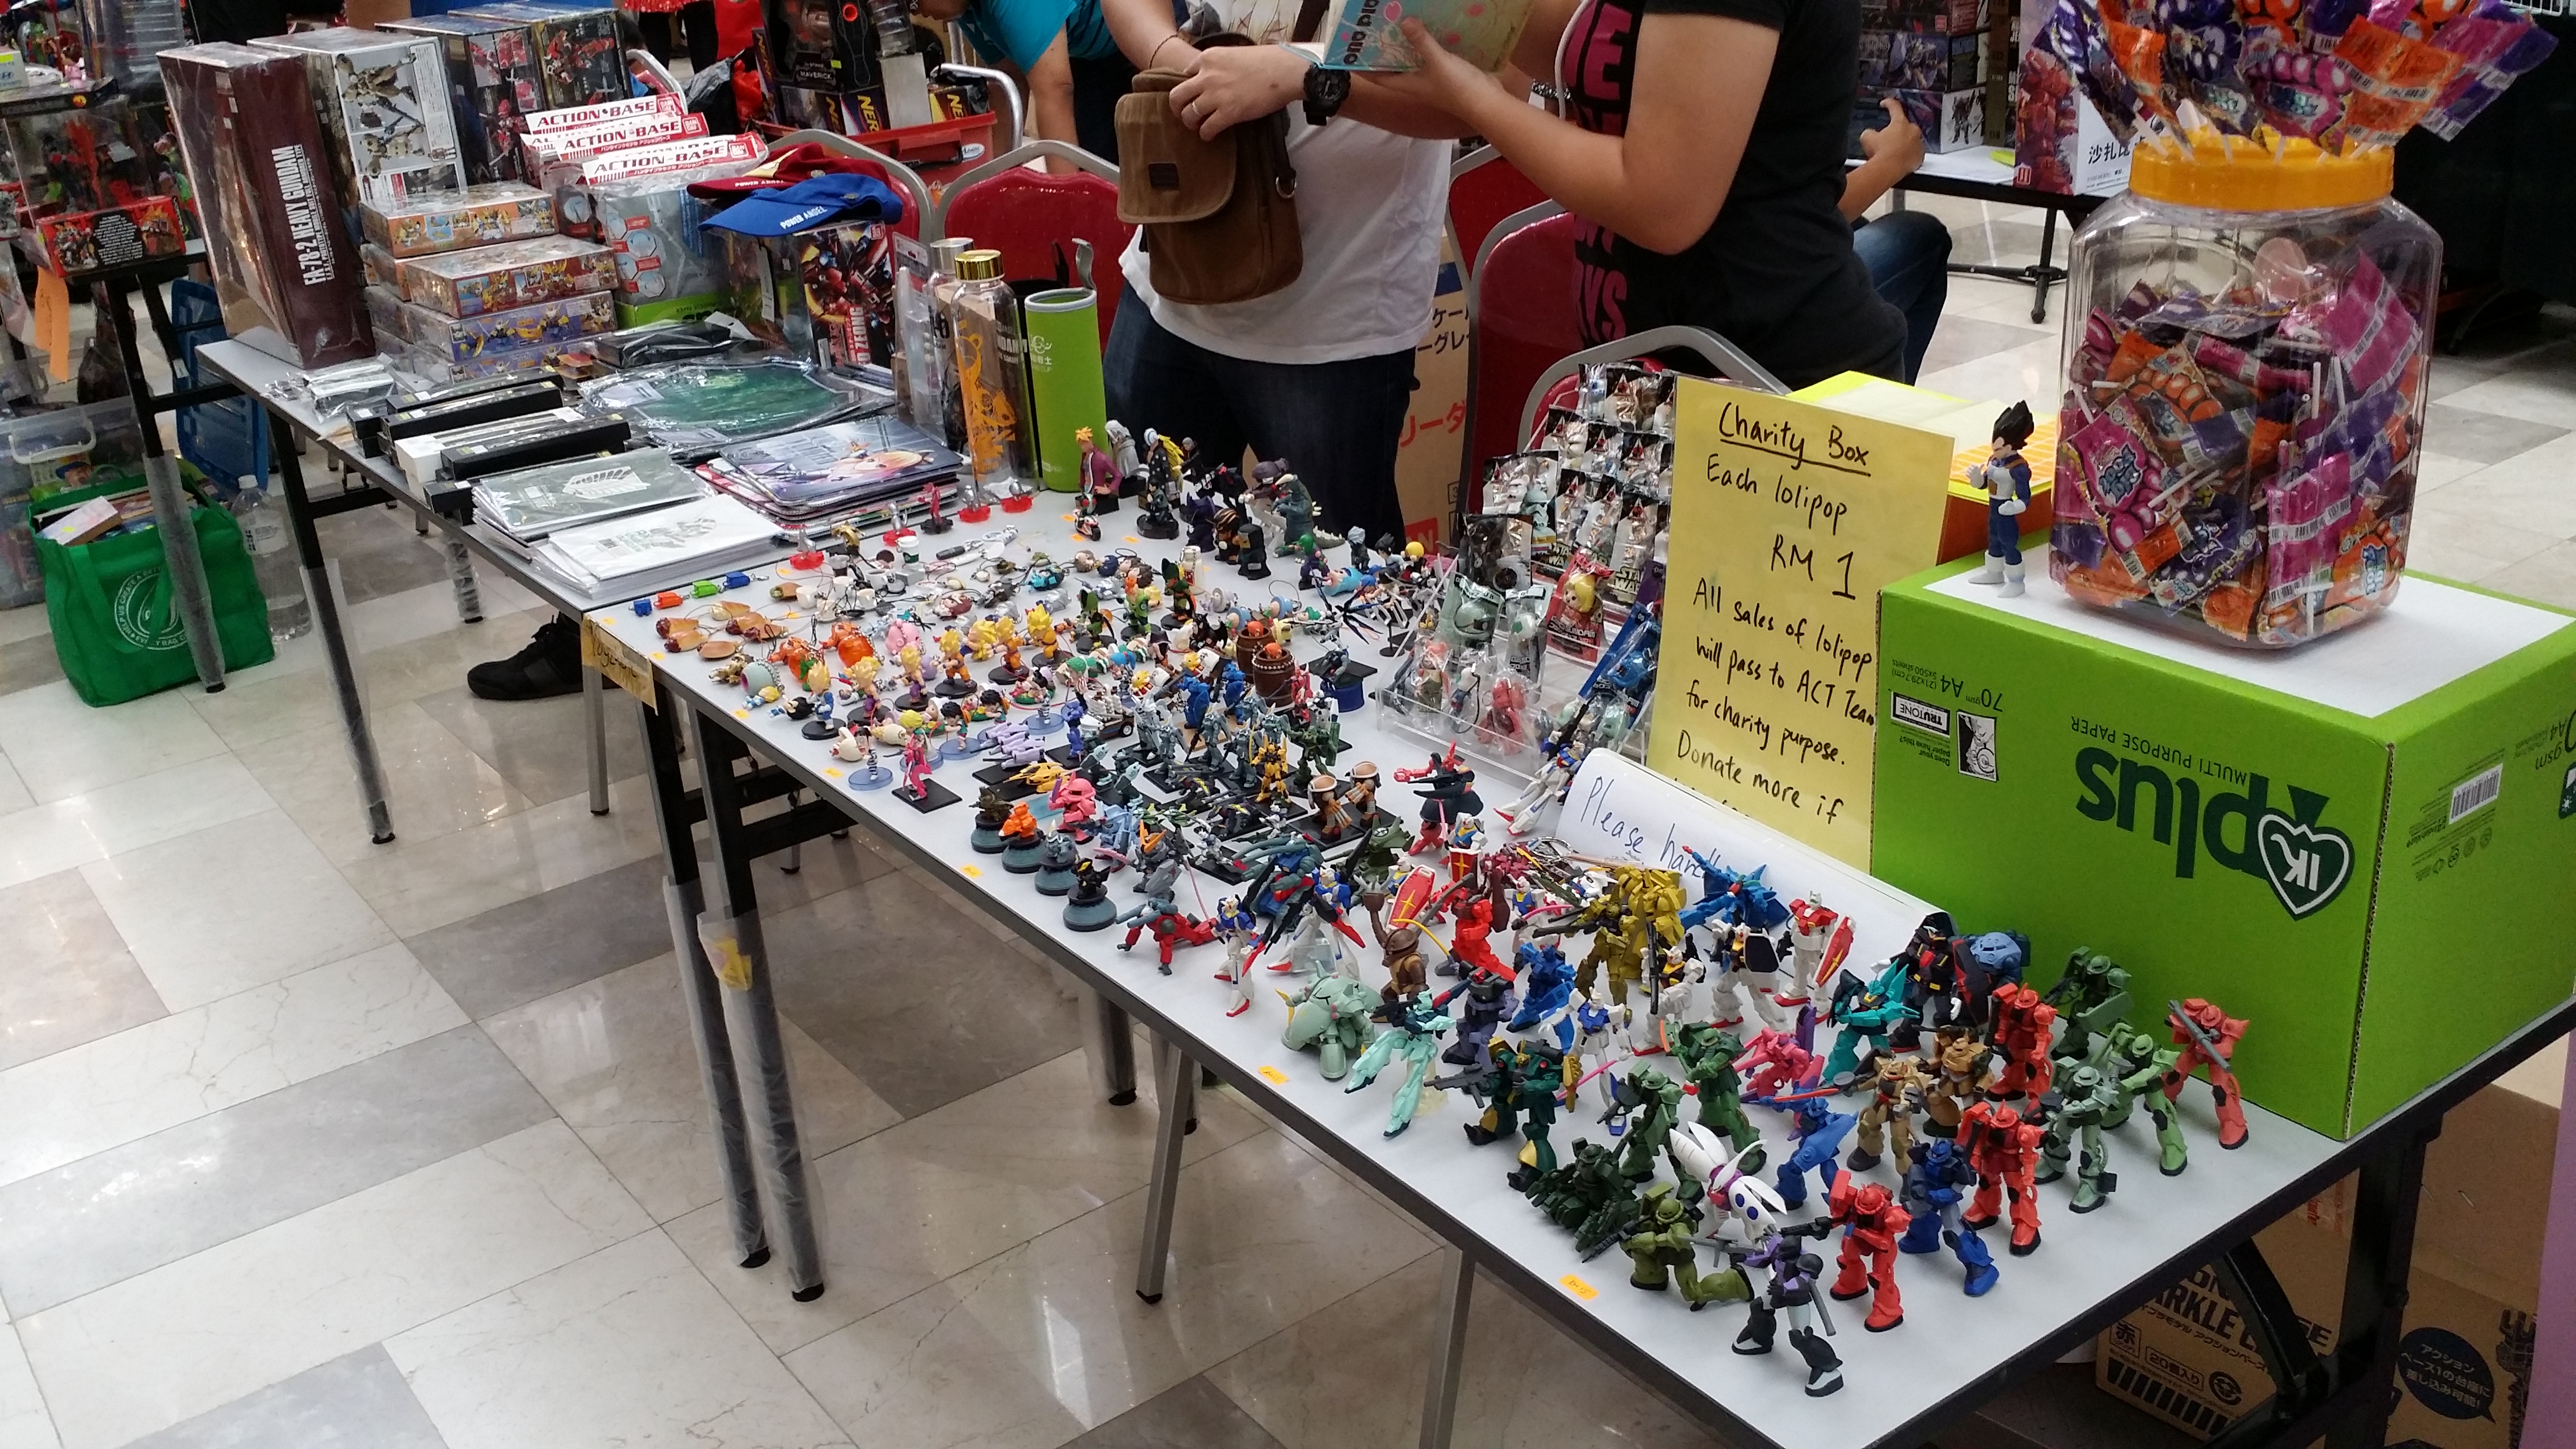 A.C.T. Charity Geek Con - 26 June '16